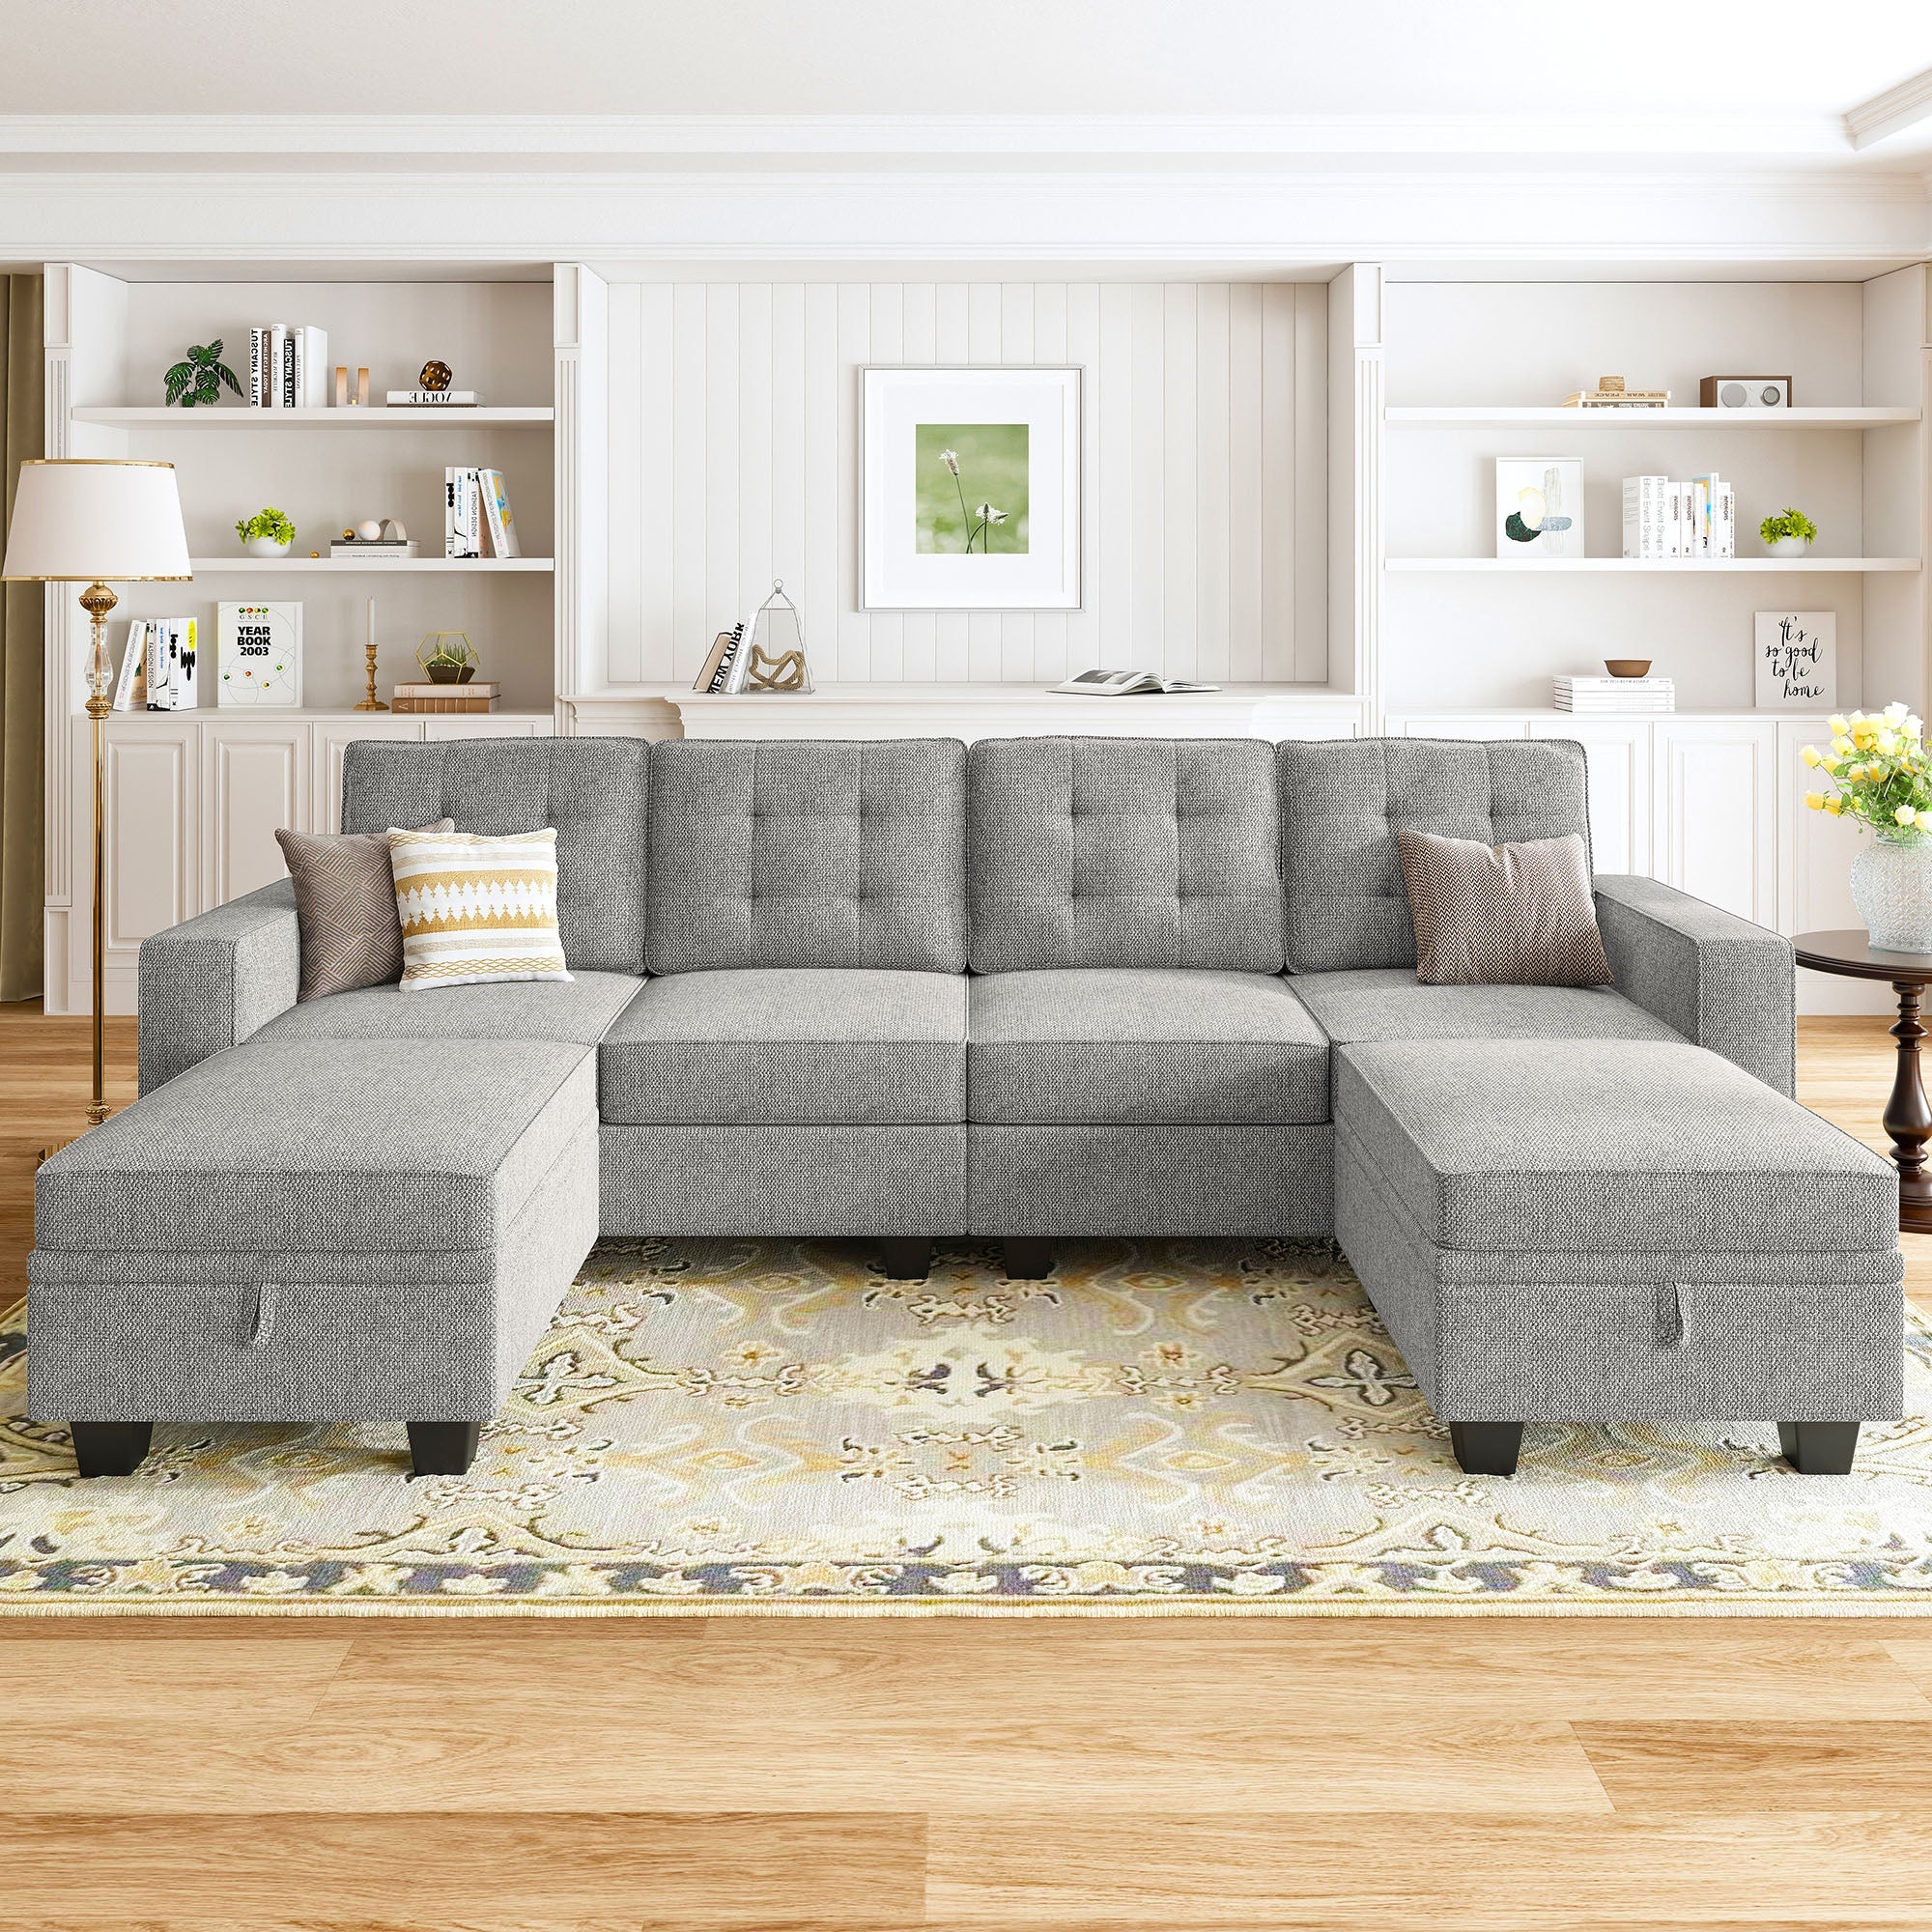 HONBAY U-Shaped Sectional Sofa with Storage Space